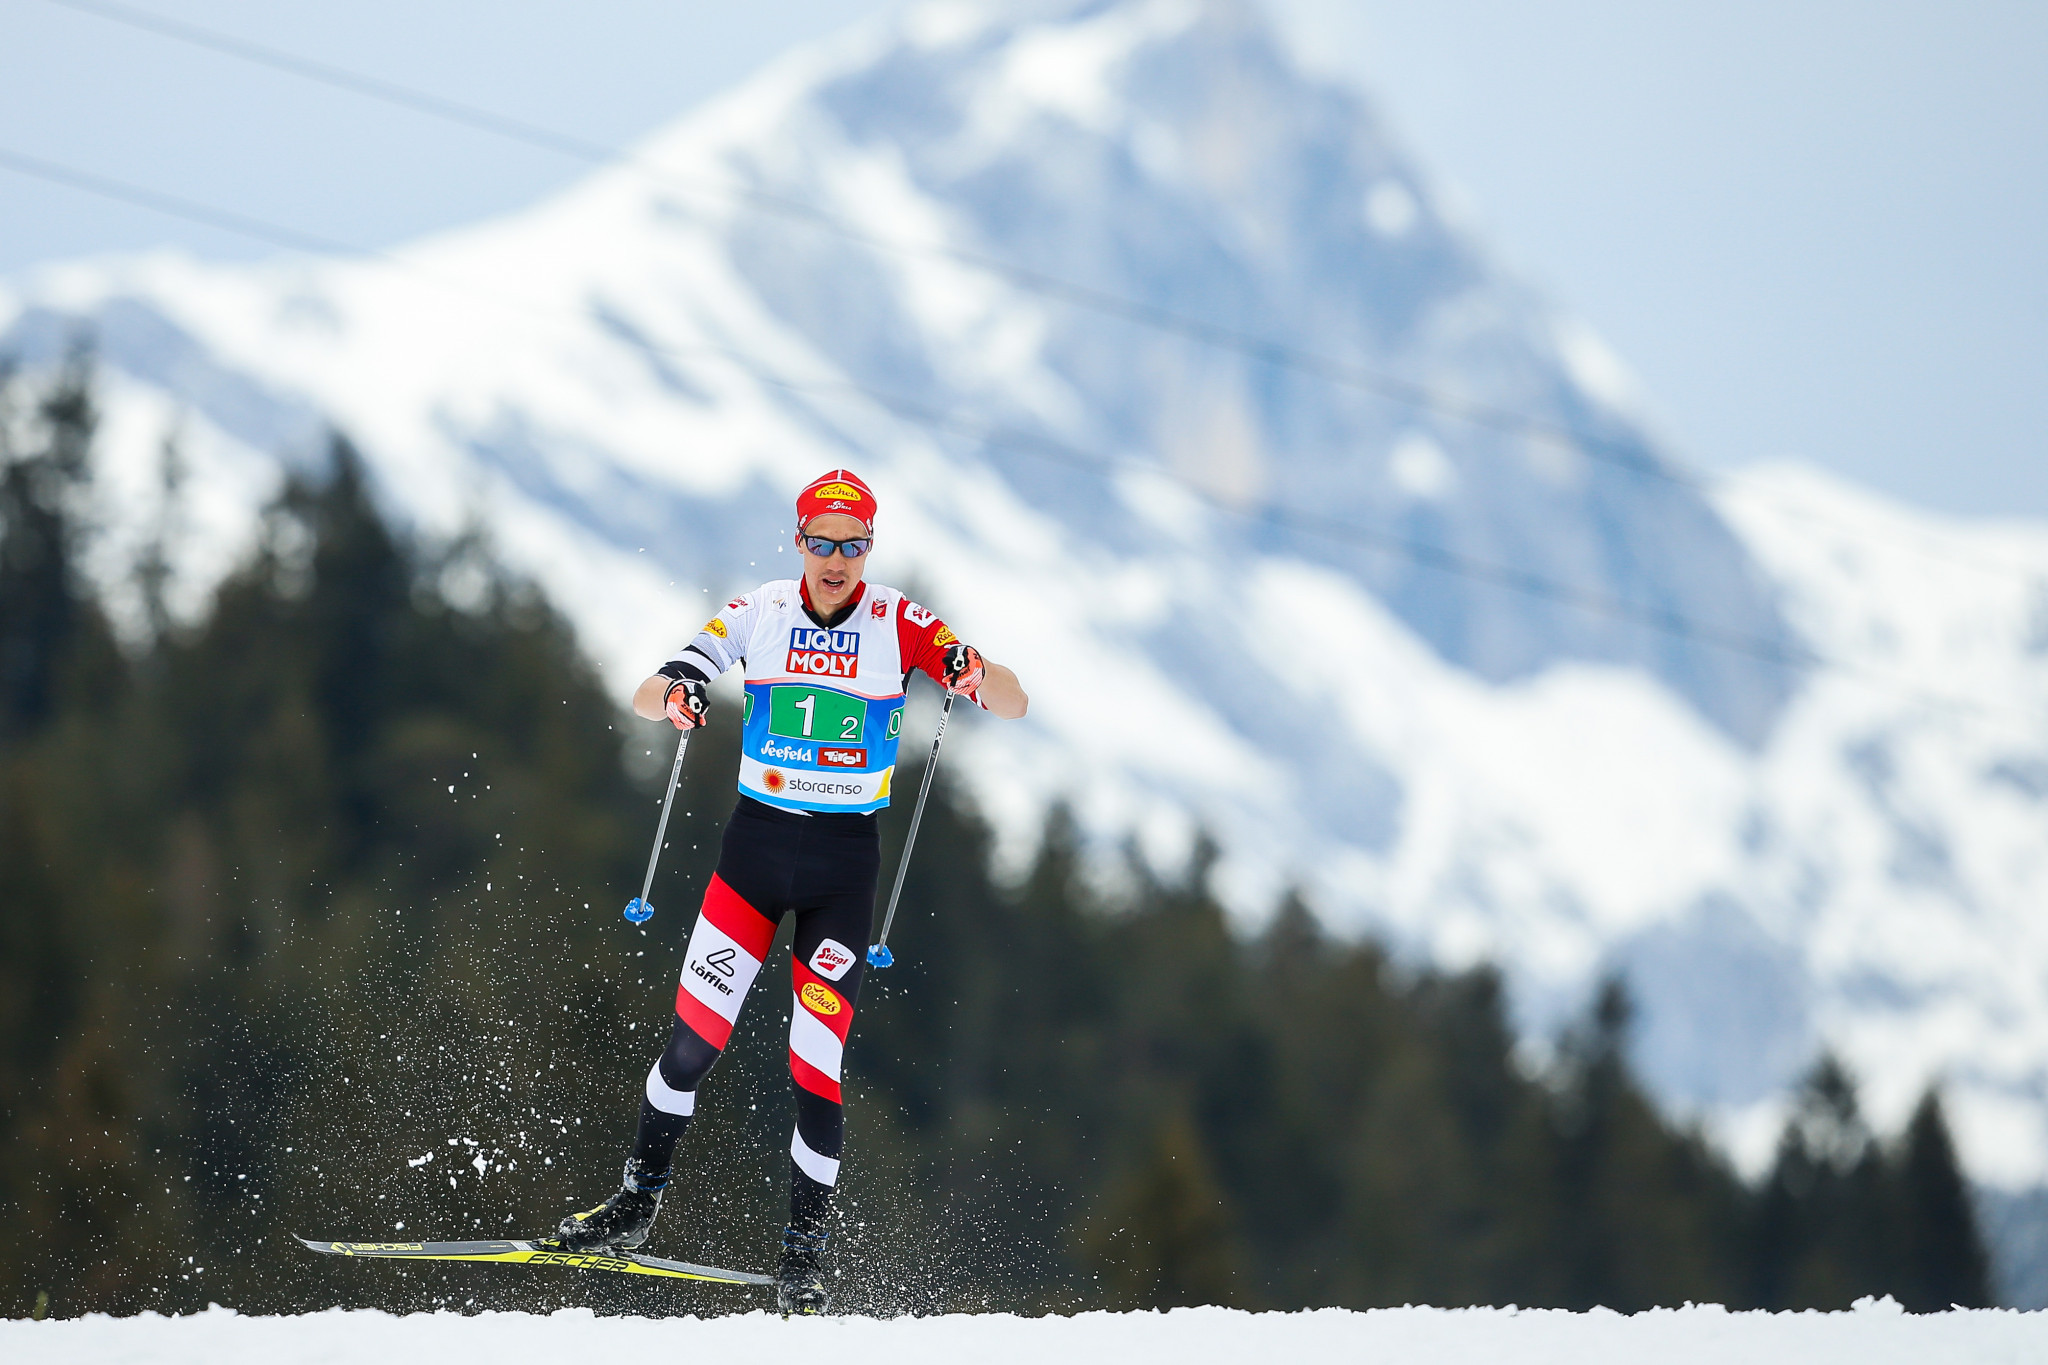 Mario Seidl is an Olympic bronze medallist ©Getty Images